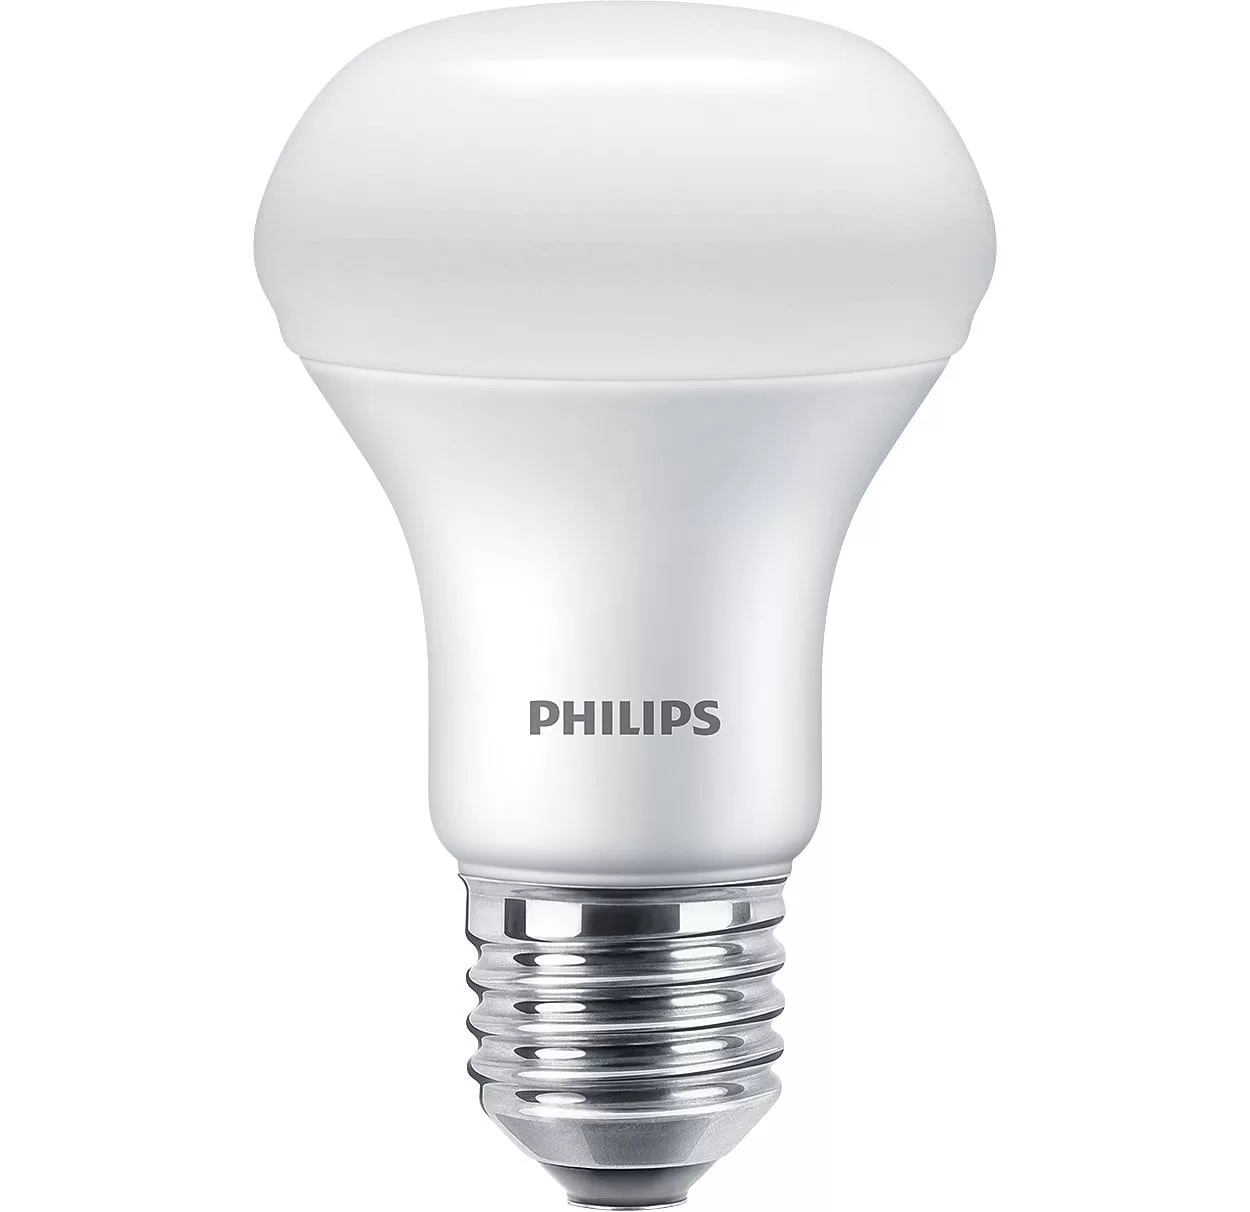 What are the different types of LED bulbs?